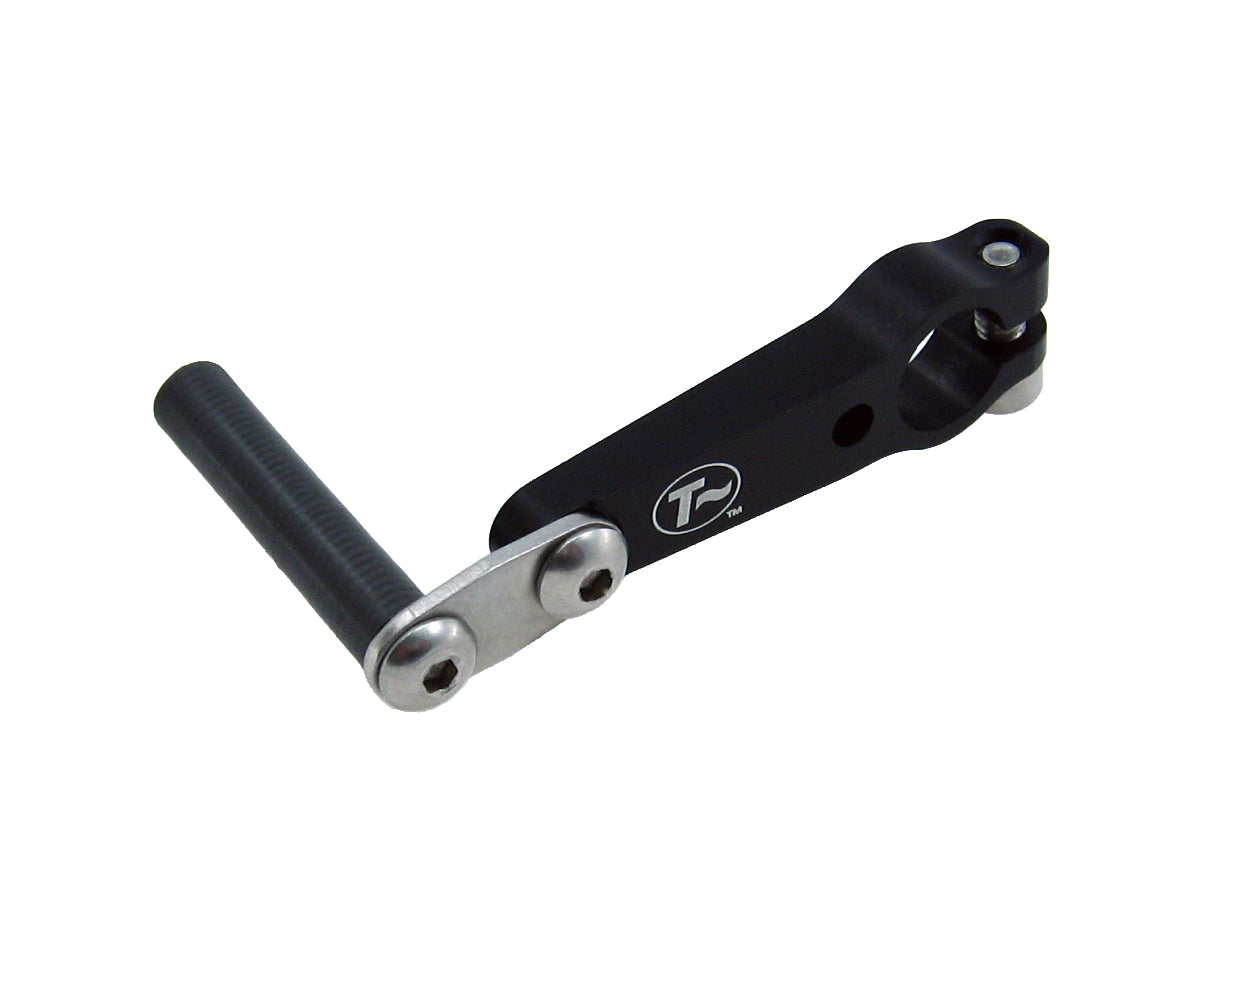 Extender T-Cycle to lengthen or shorten the chain guide